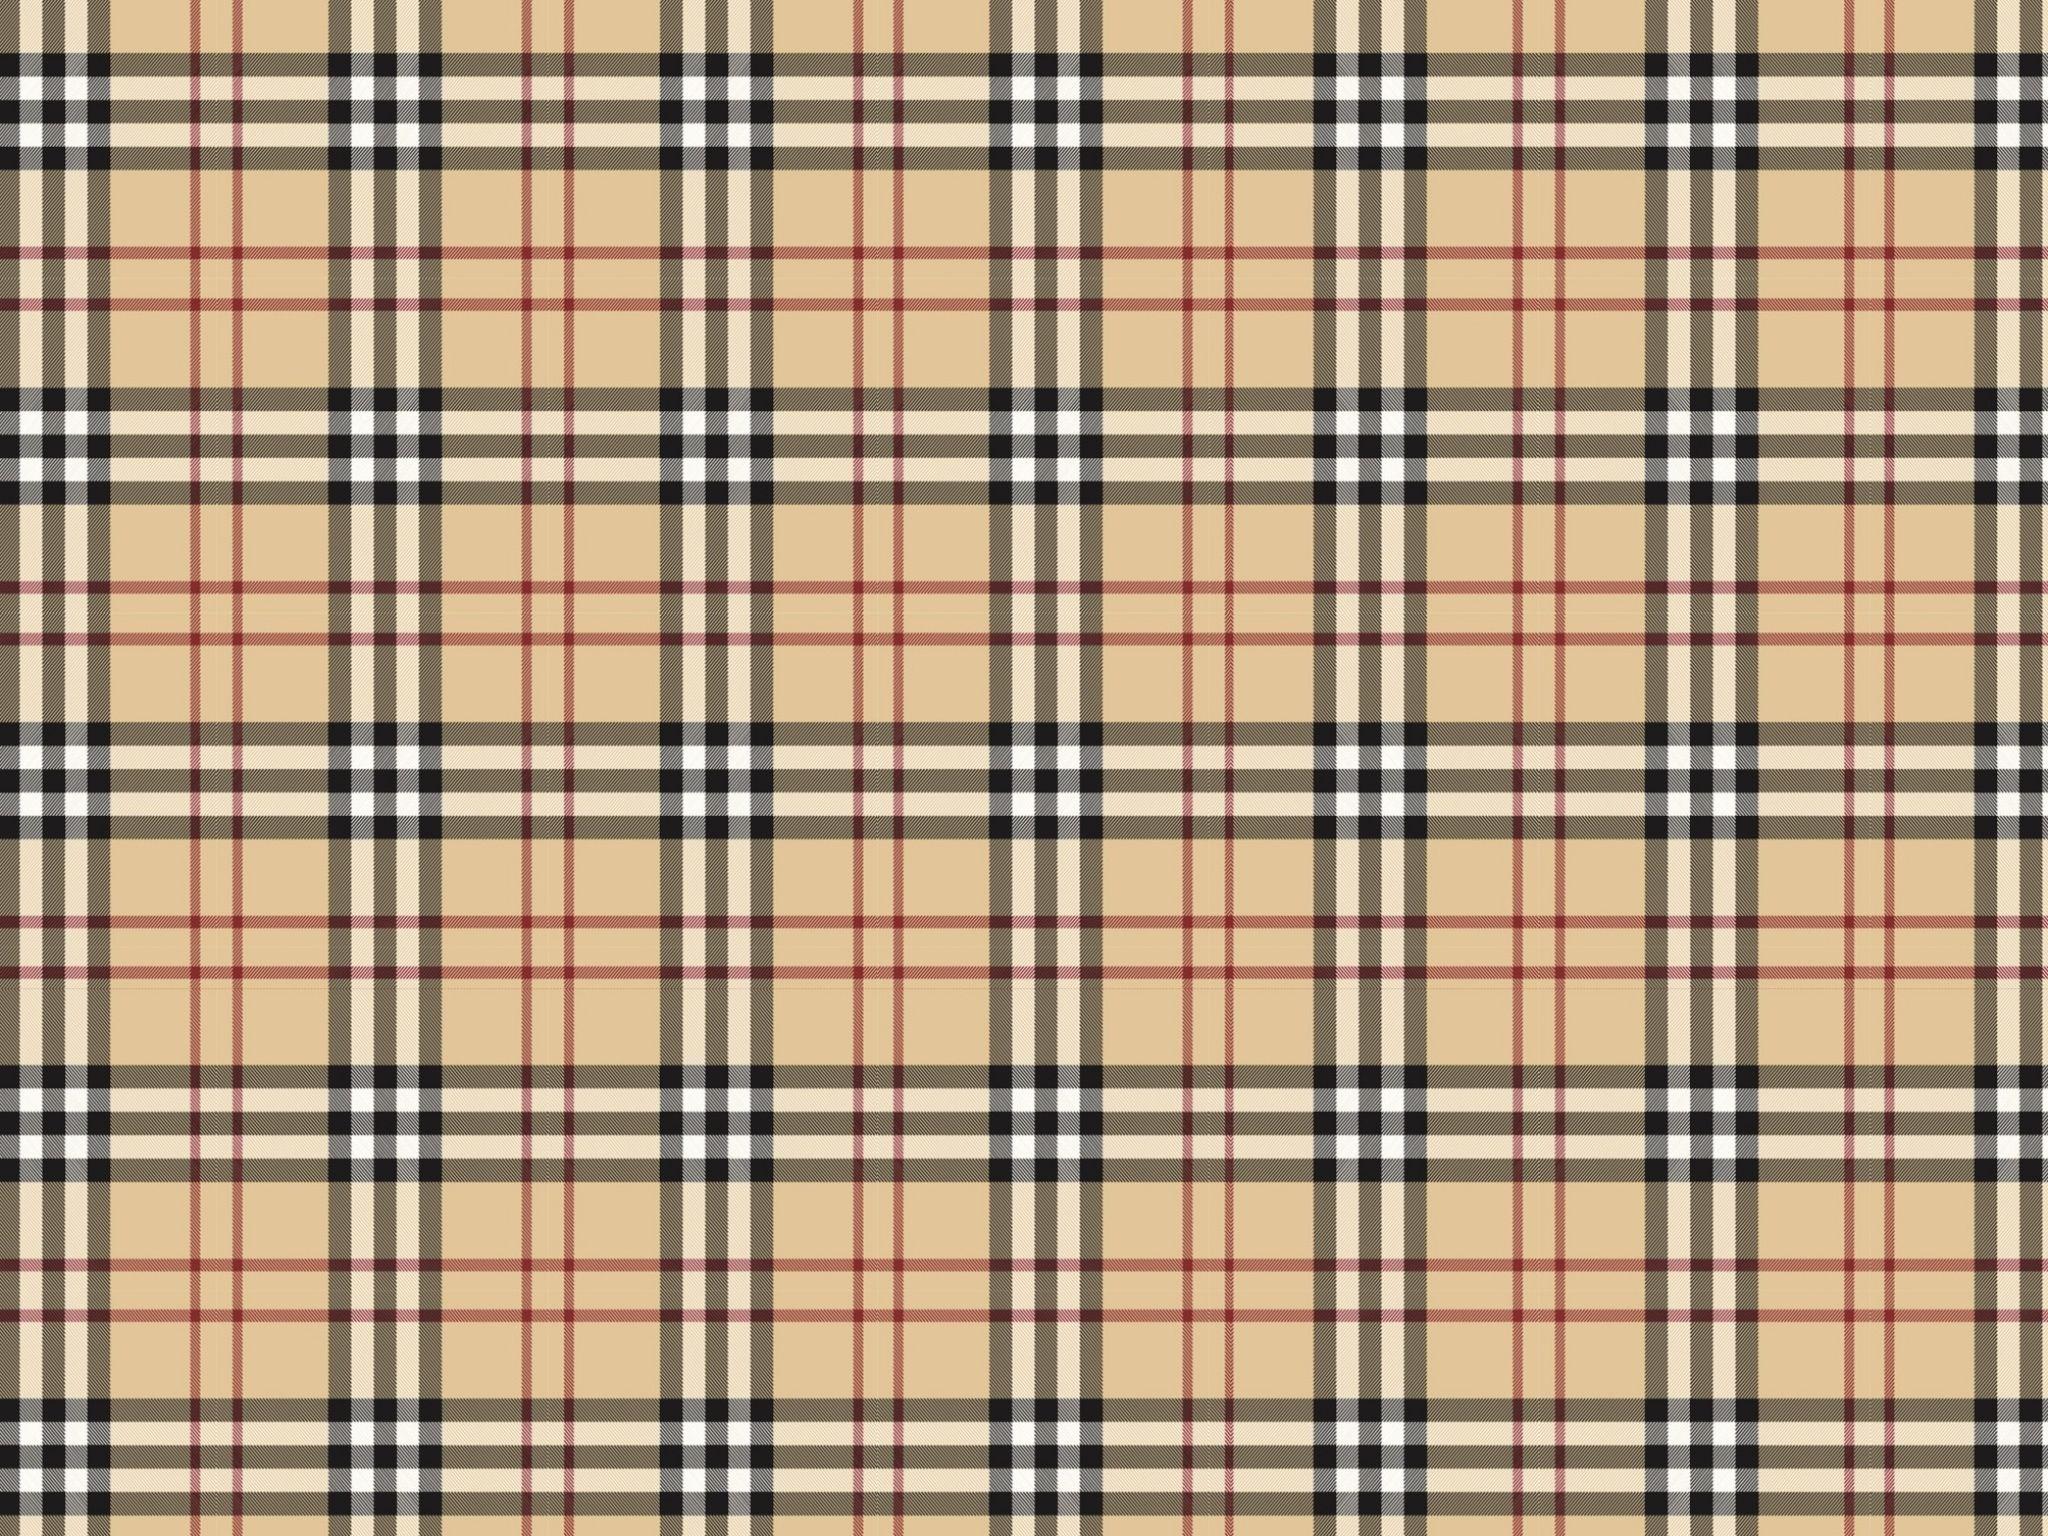 Burberry Pattern - Top Free Burberry Pattern -